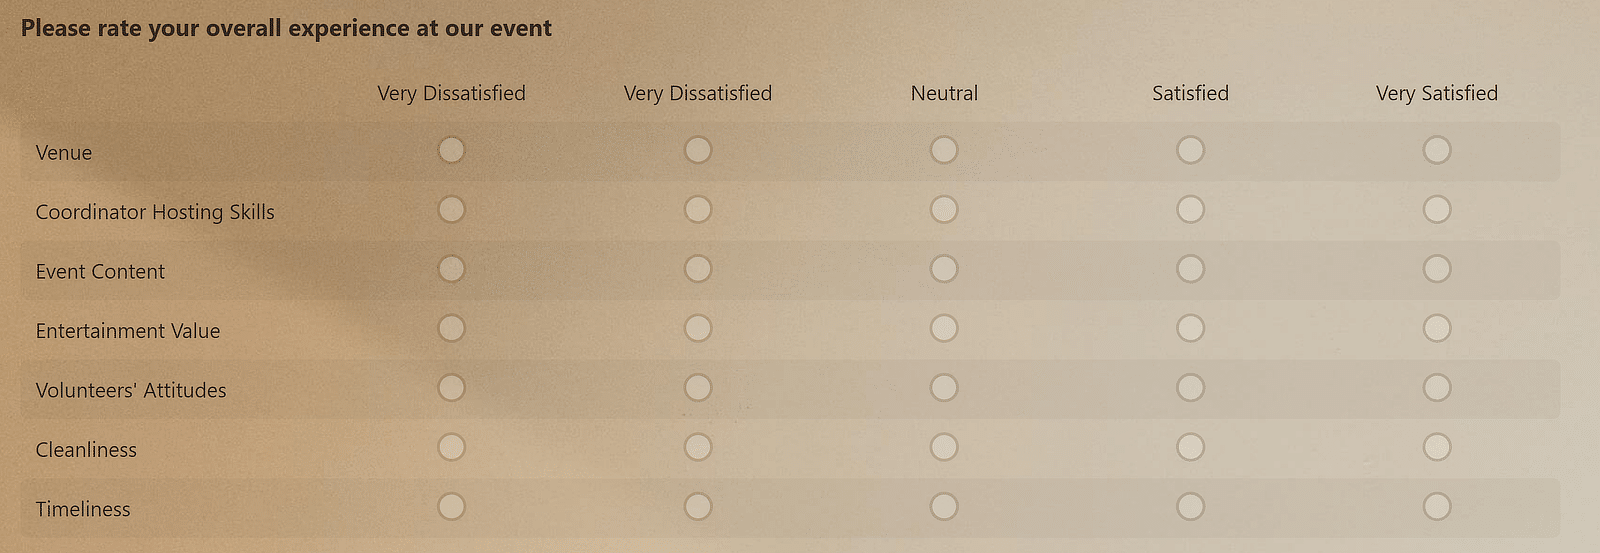 Event evaluation - Likert scale